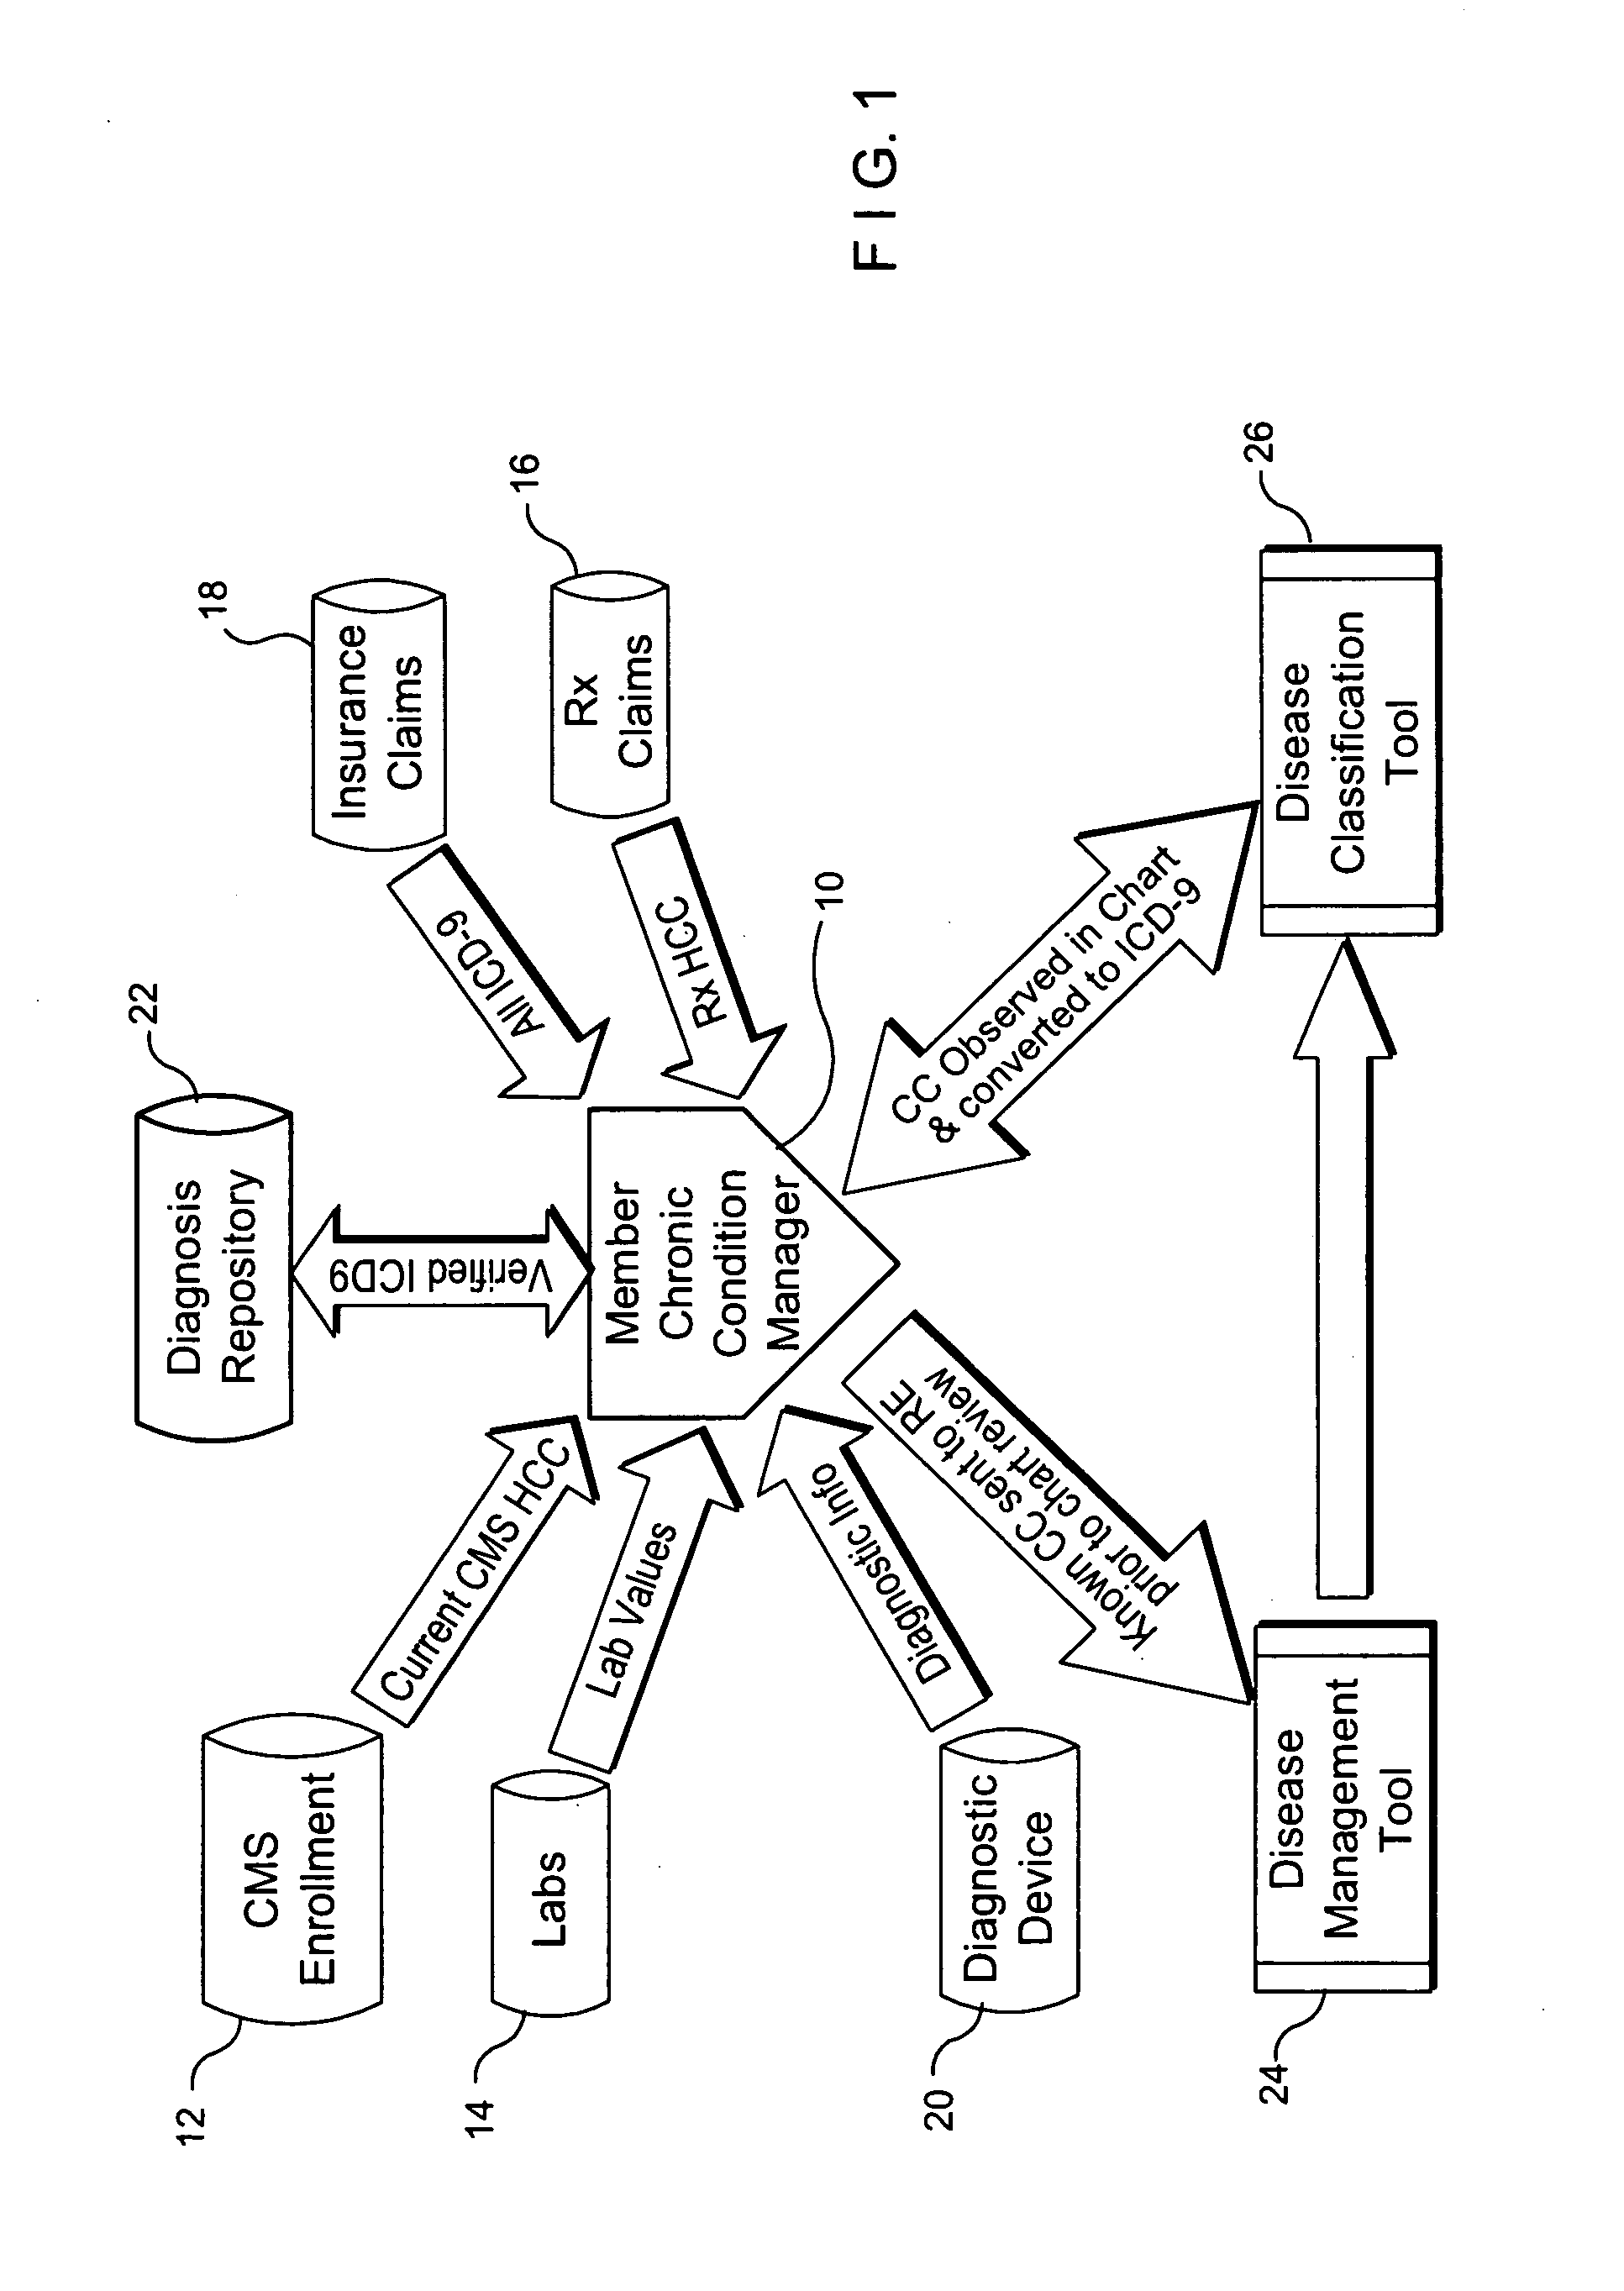 System and method for determining and verifying disease classification codes